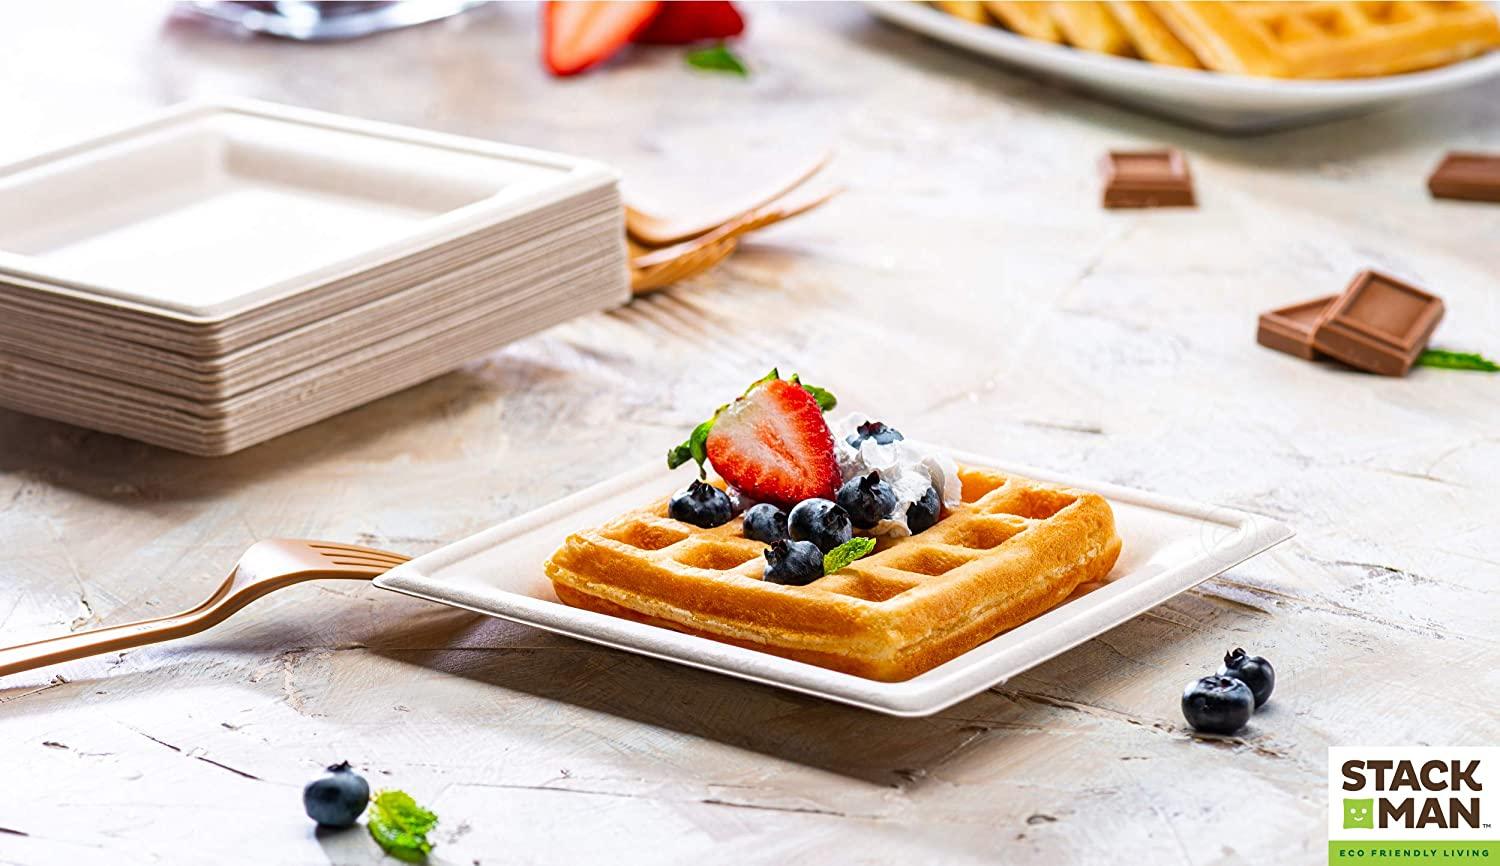 100% Compostable Plates, Disposable Paper Plates 50-Count - Heavy Duty, Biodegradable Plates Made of Bagasse - Eco Friendly and Sustainable (Natural